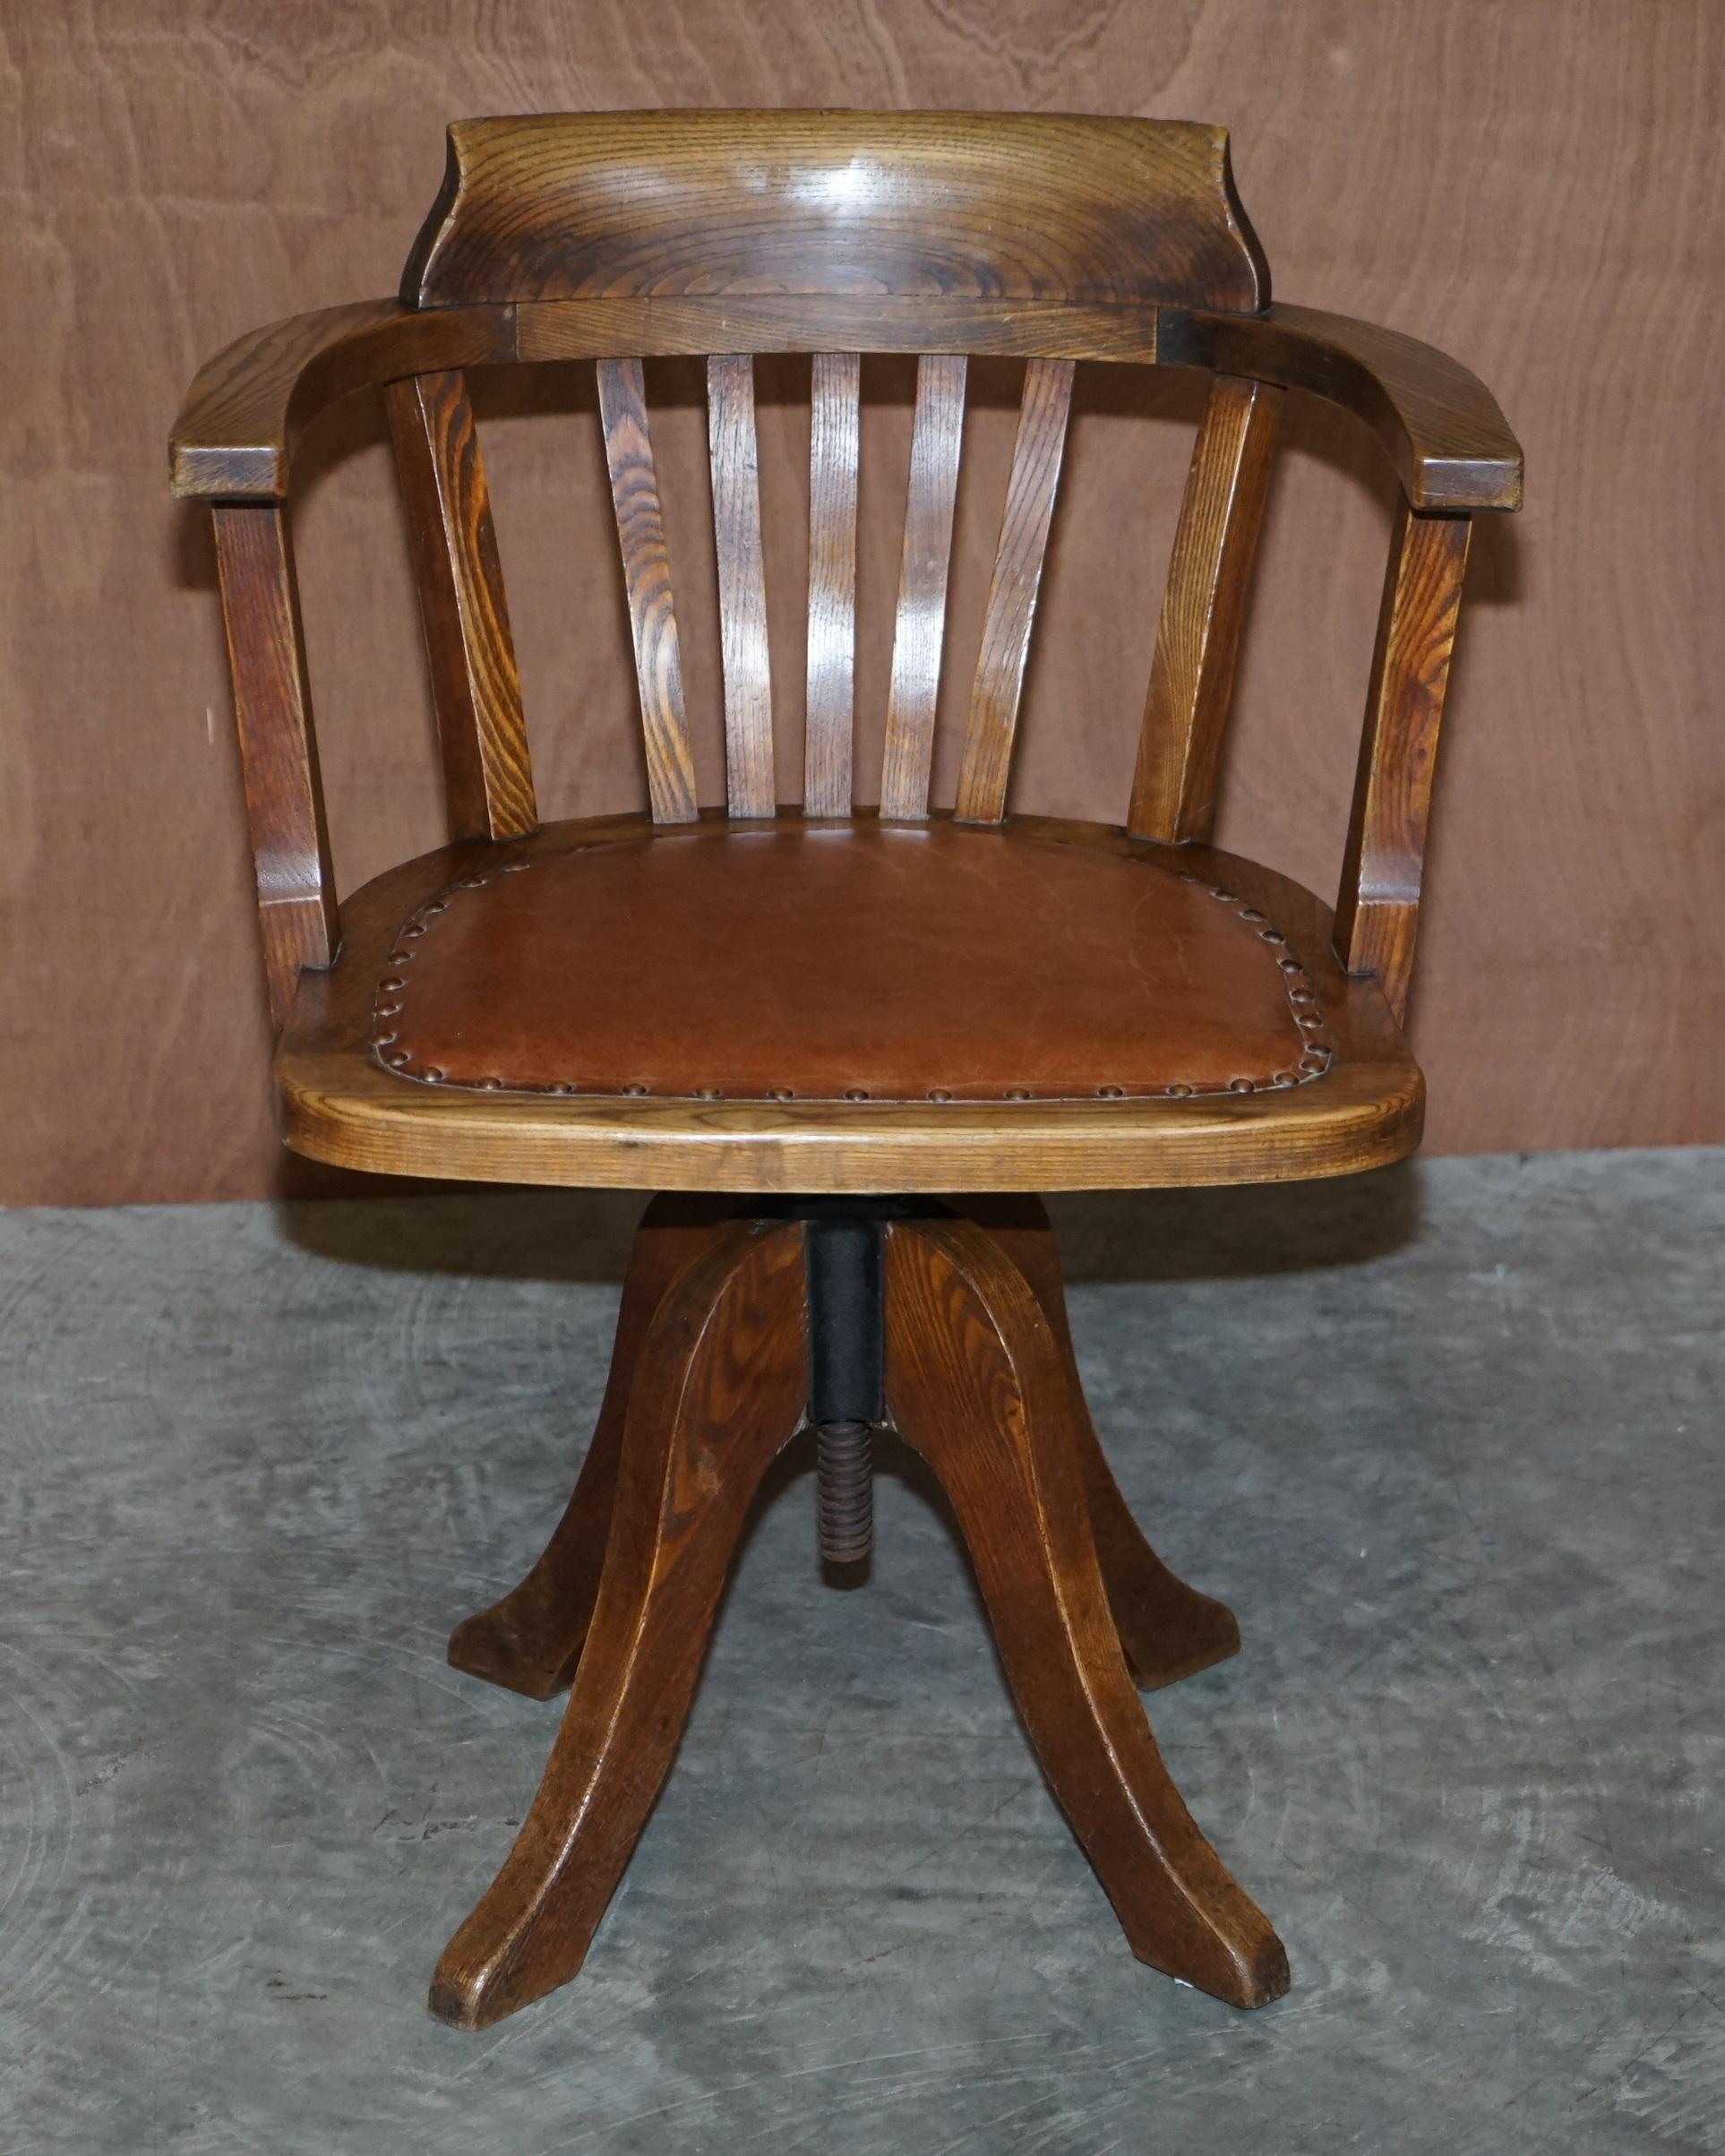 We are delighted to offer this restored circa Edwardian circa 1900 director’s armchair with heritage brown leather seat.

This chair is really quite exquisite, it has a tiger oak frame which means the timber was cut on the bias to give it that